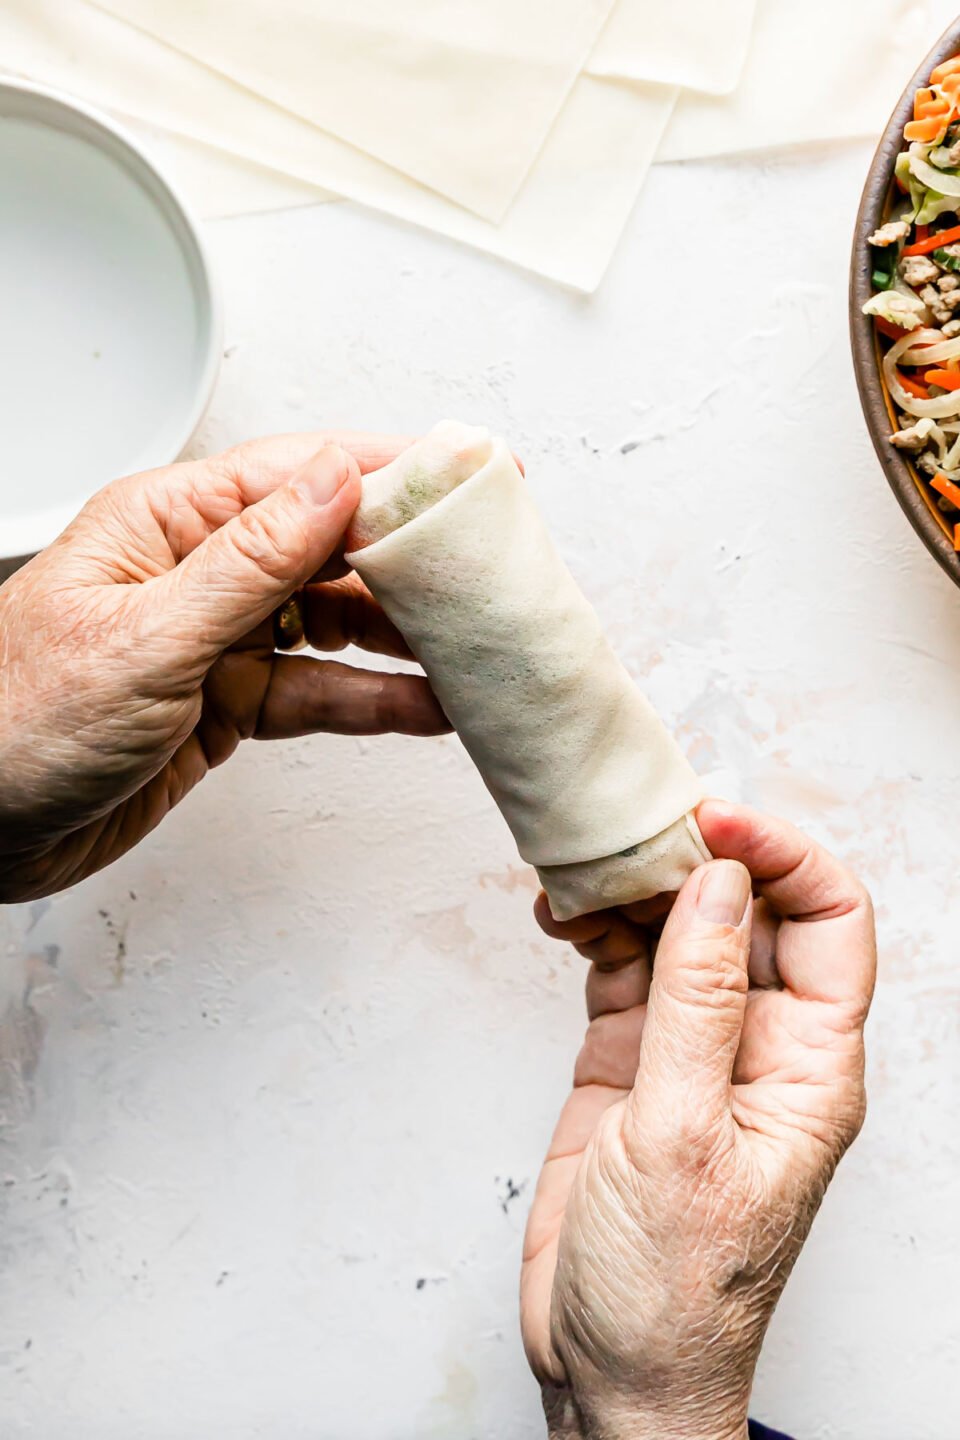 A woman's hands hold a finished assembled pork egg roll over a creamy white textured surface. A yellow ceramic bowl filled with pork egg roll filling, a stack of egg roll wrappers and a small white bowl filled with water rest atop the surface below.